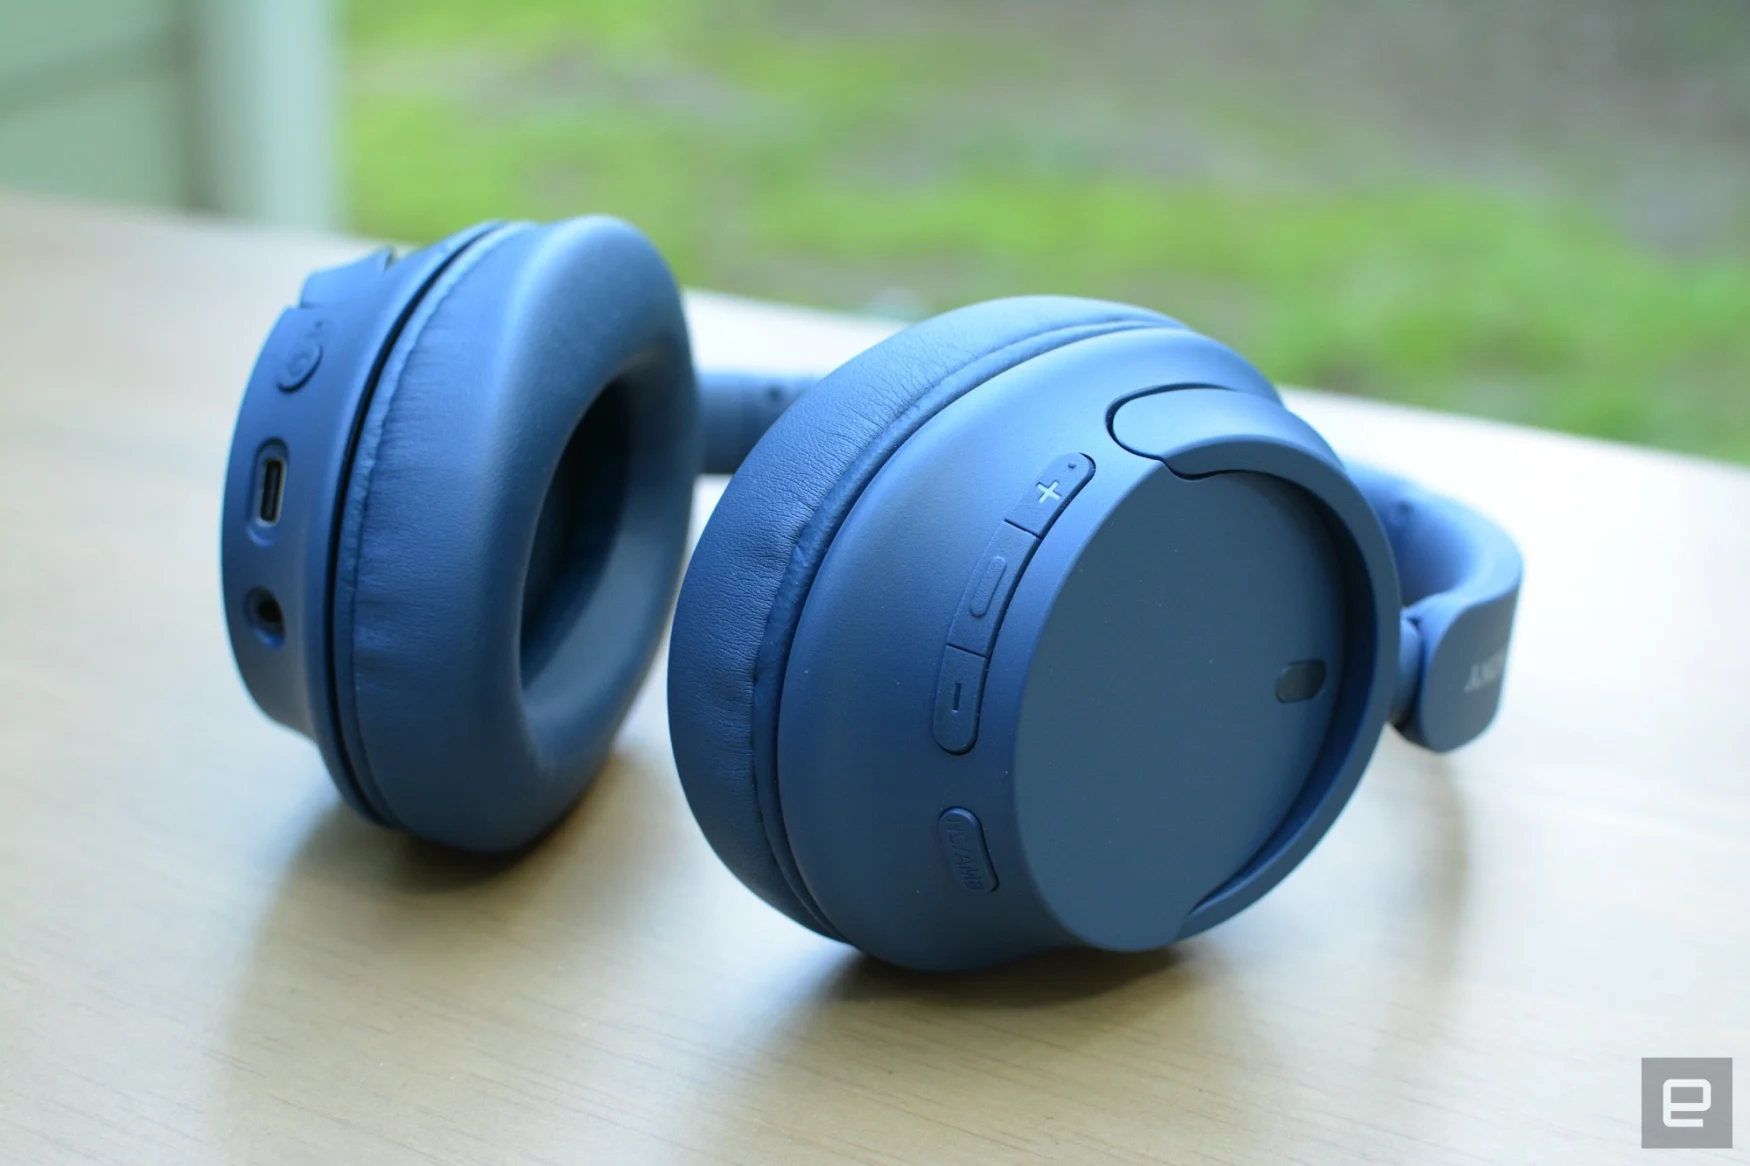 Sony has been king of the headphone heap for a while with its 1000X line, but the company is staking its claim on the mid-range too. With the WH-CH720N, the company continues its track record of great sound quality and a comfy fit in a set of more affordable headphones. You’ll have to forgo some premium features, but there’s still plenty to like here. 